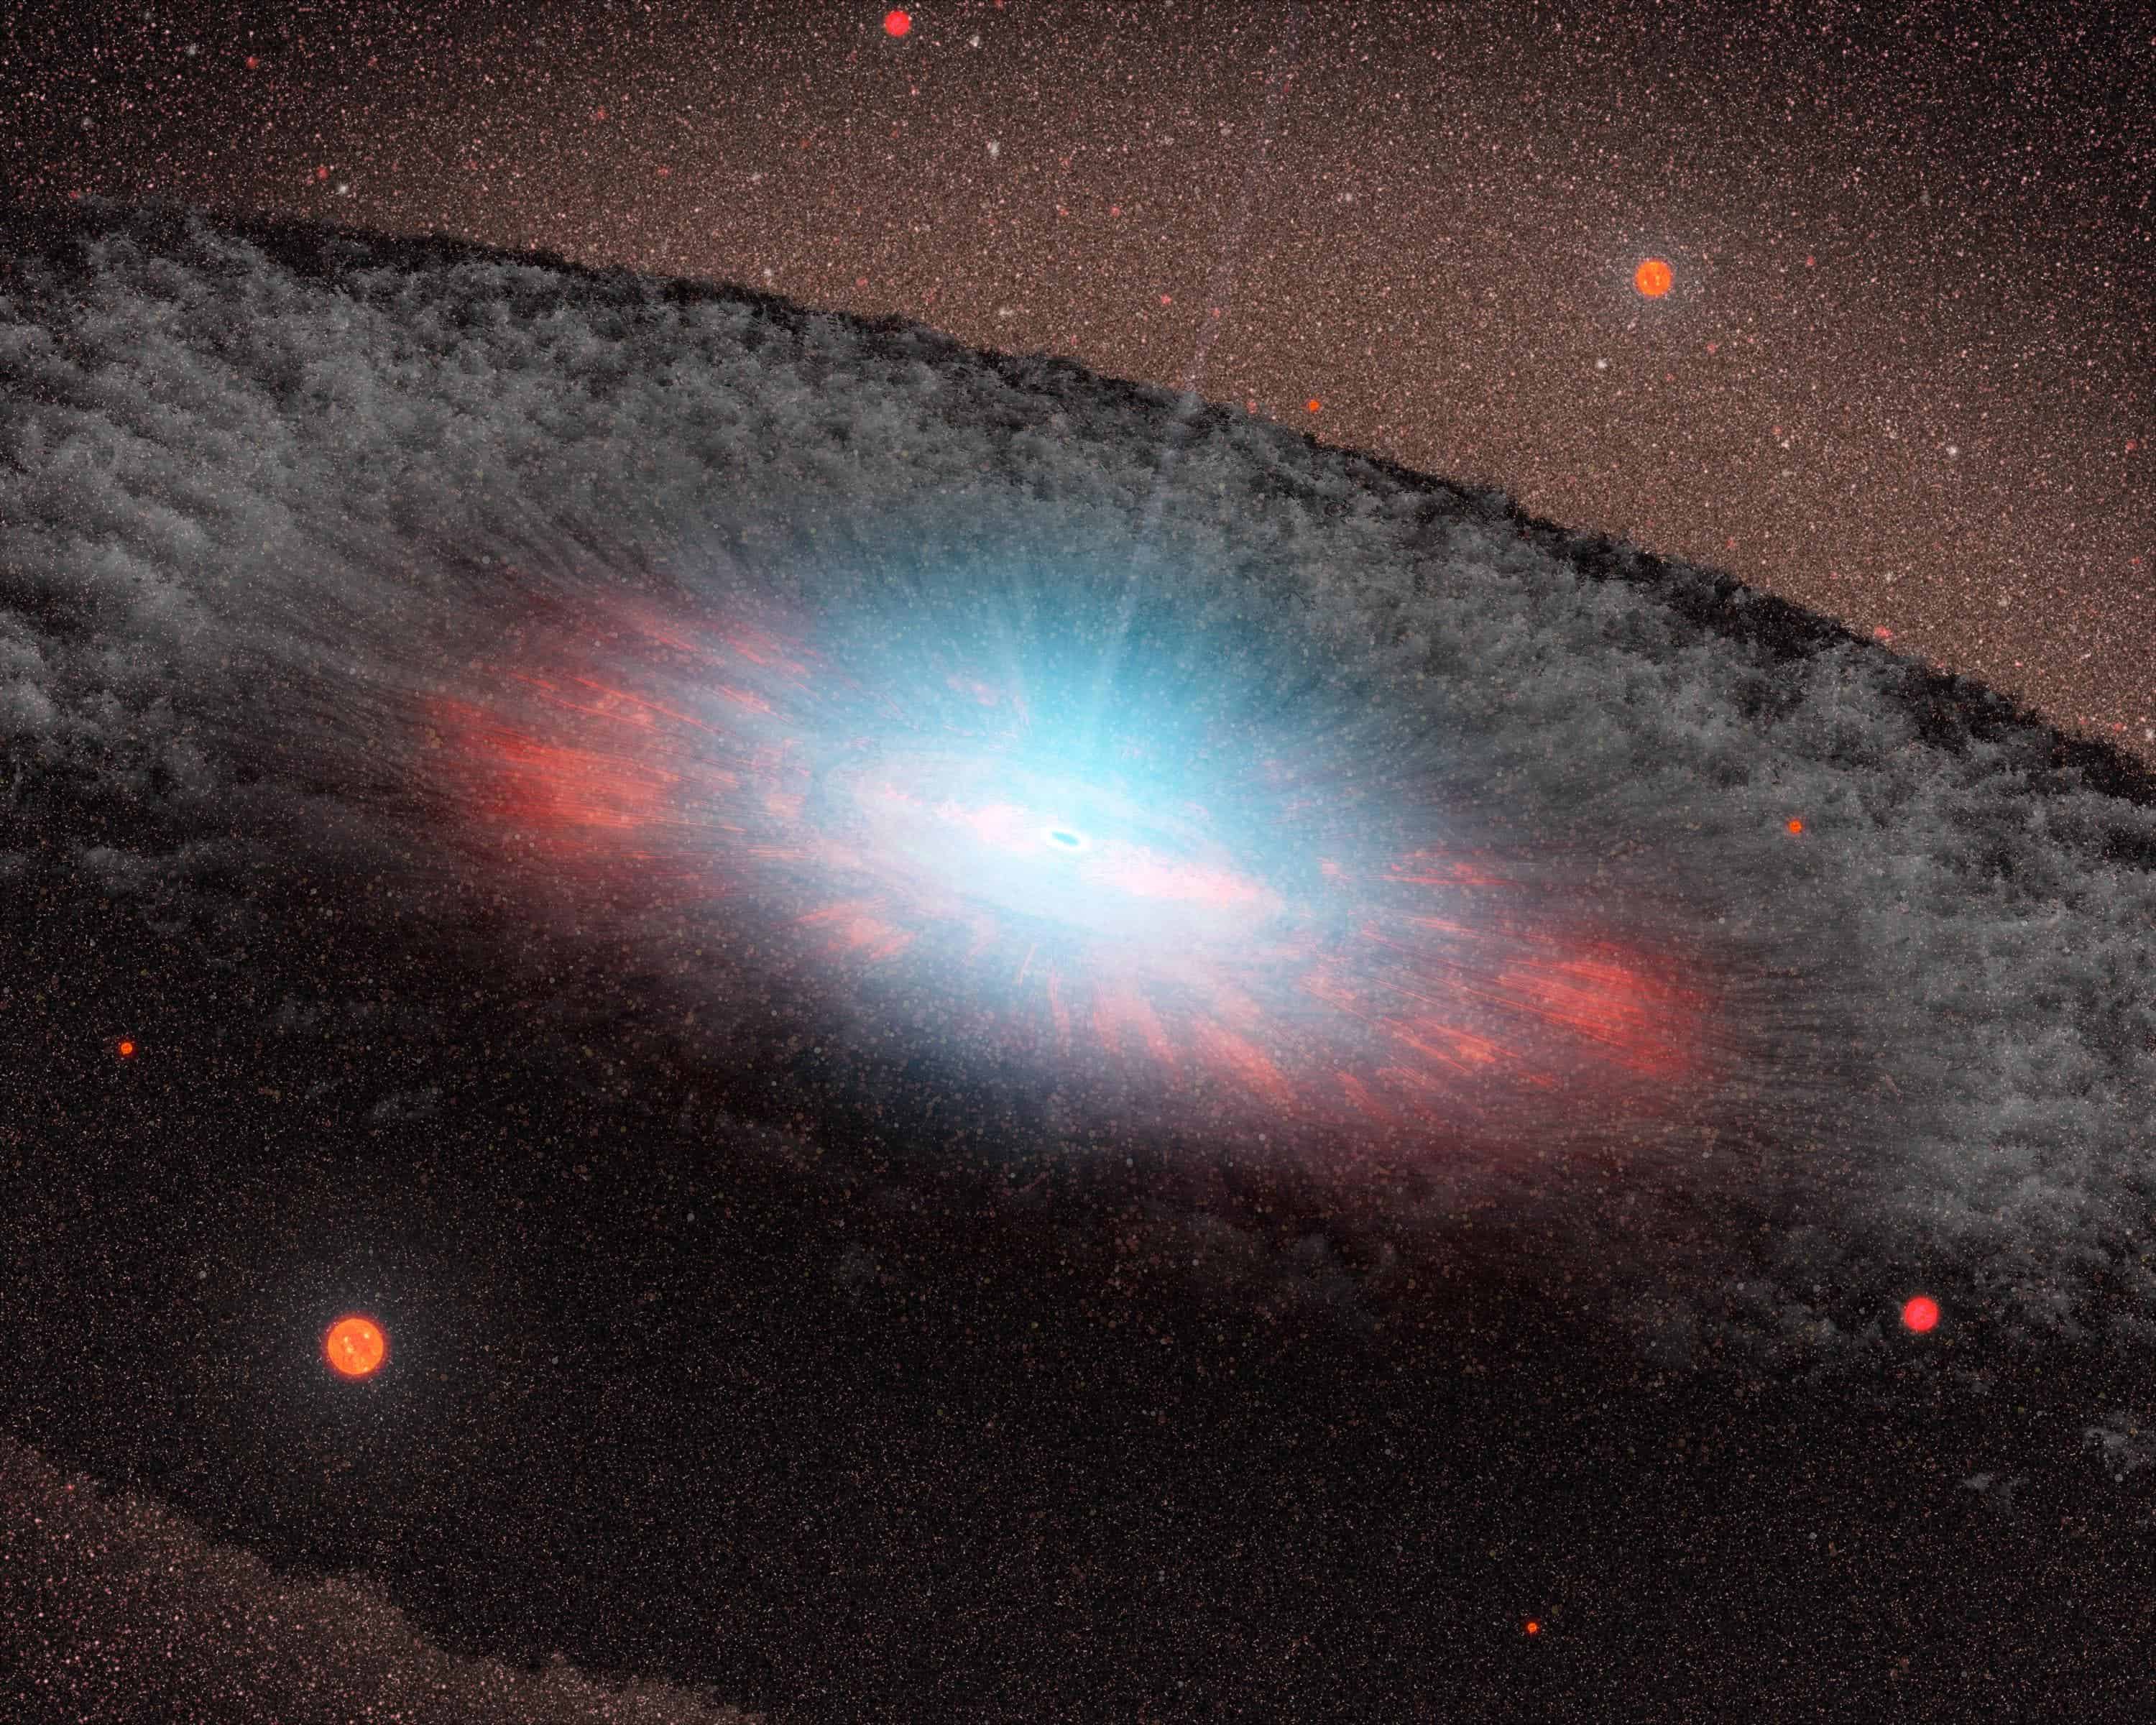 Artist's impression of a supermassive black hole at a galaxy's center. The blue color represents radiation pouring out from material very close to the black hole.
Image credits NASA/JPL-Caltech.